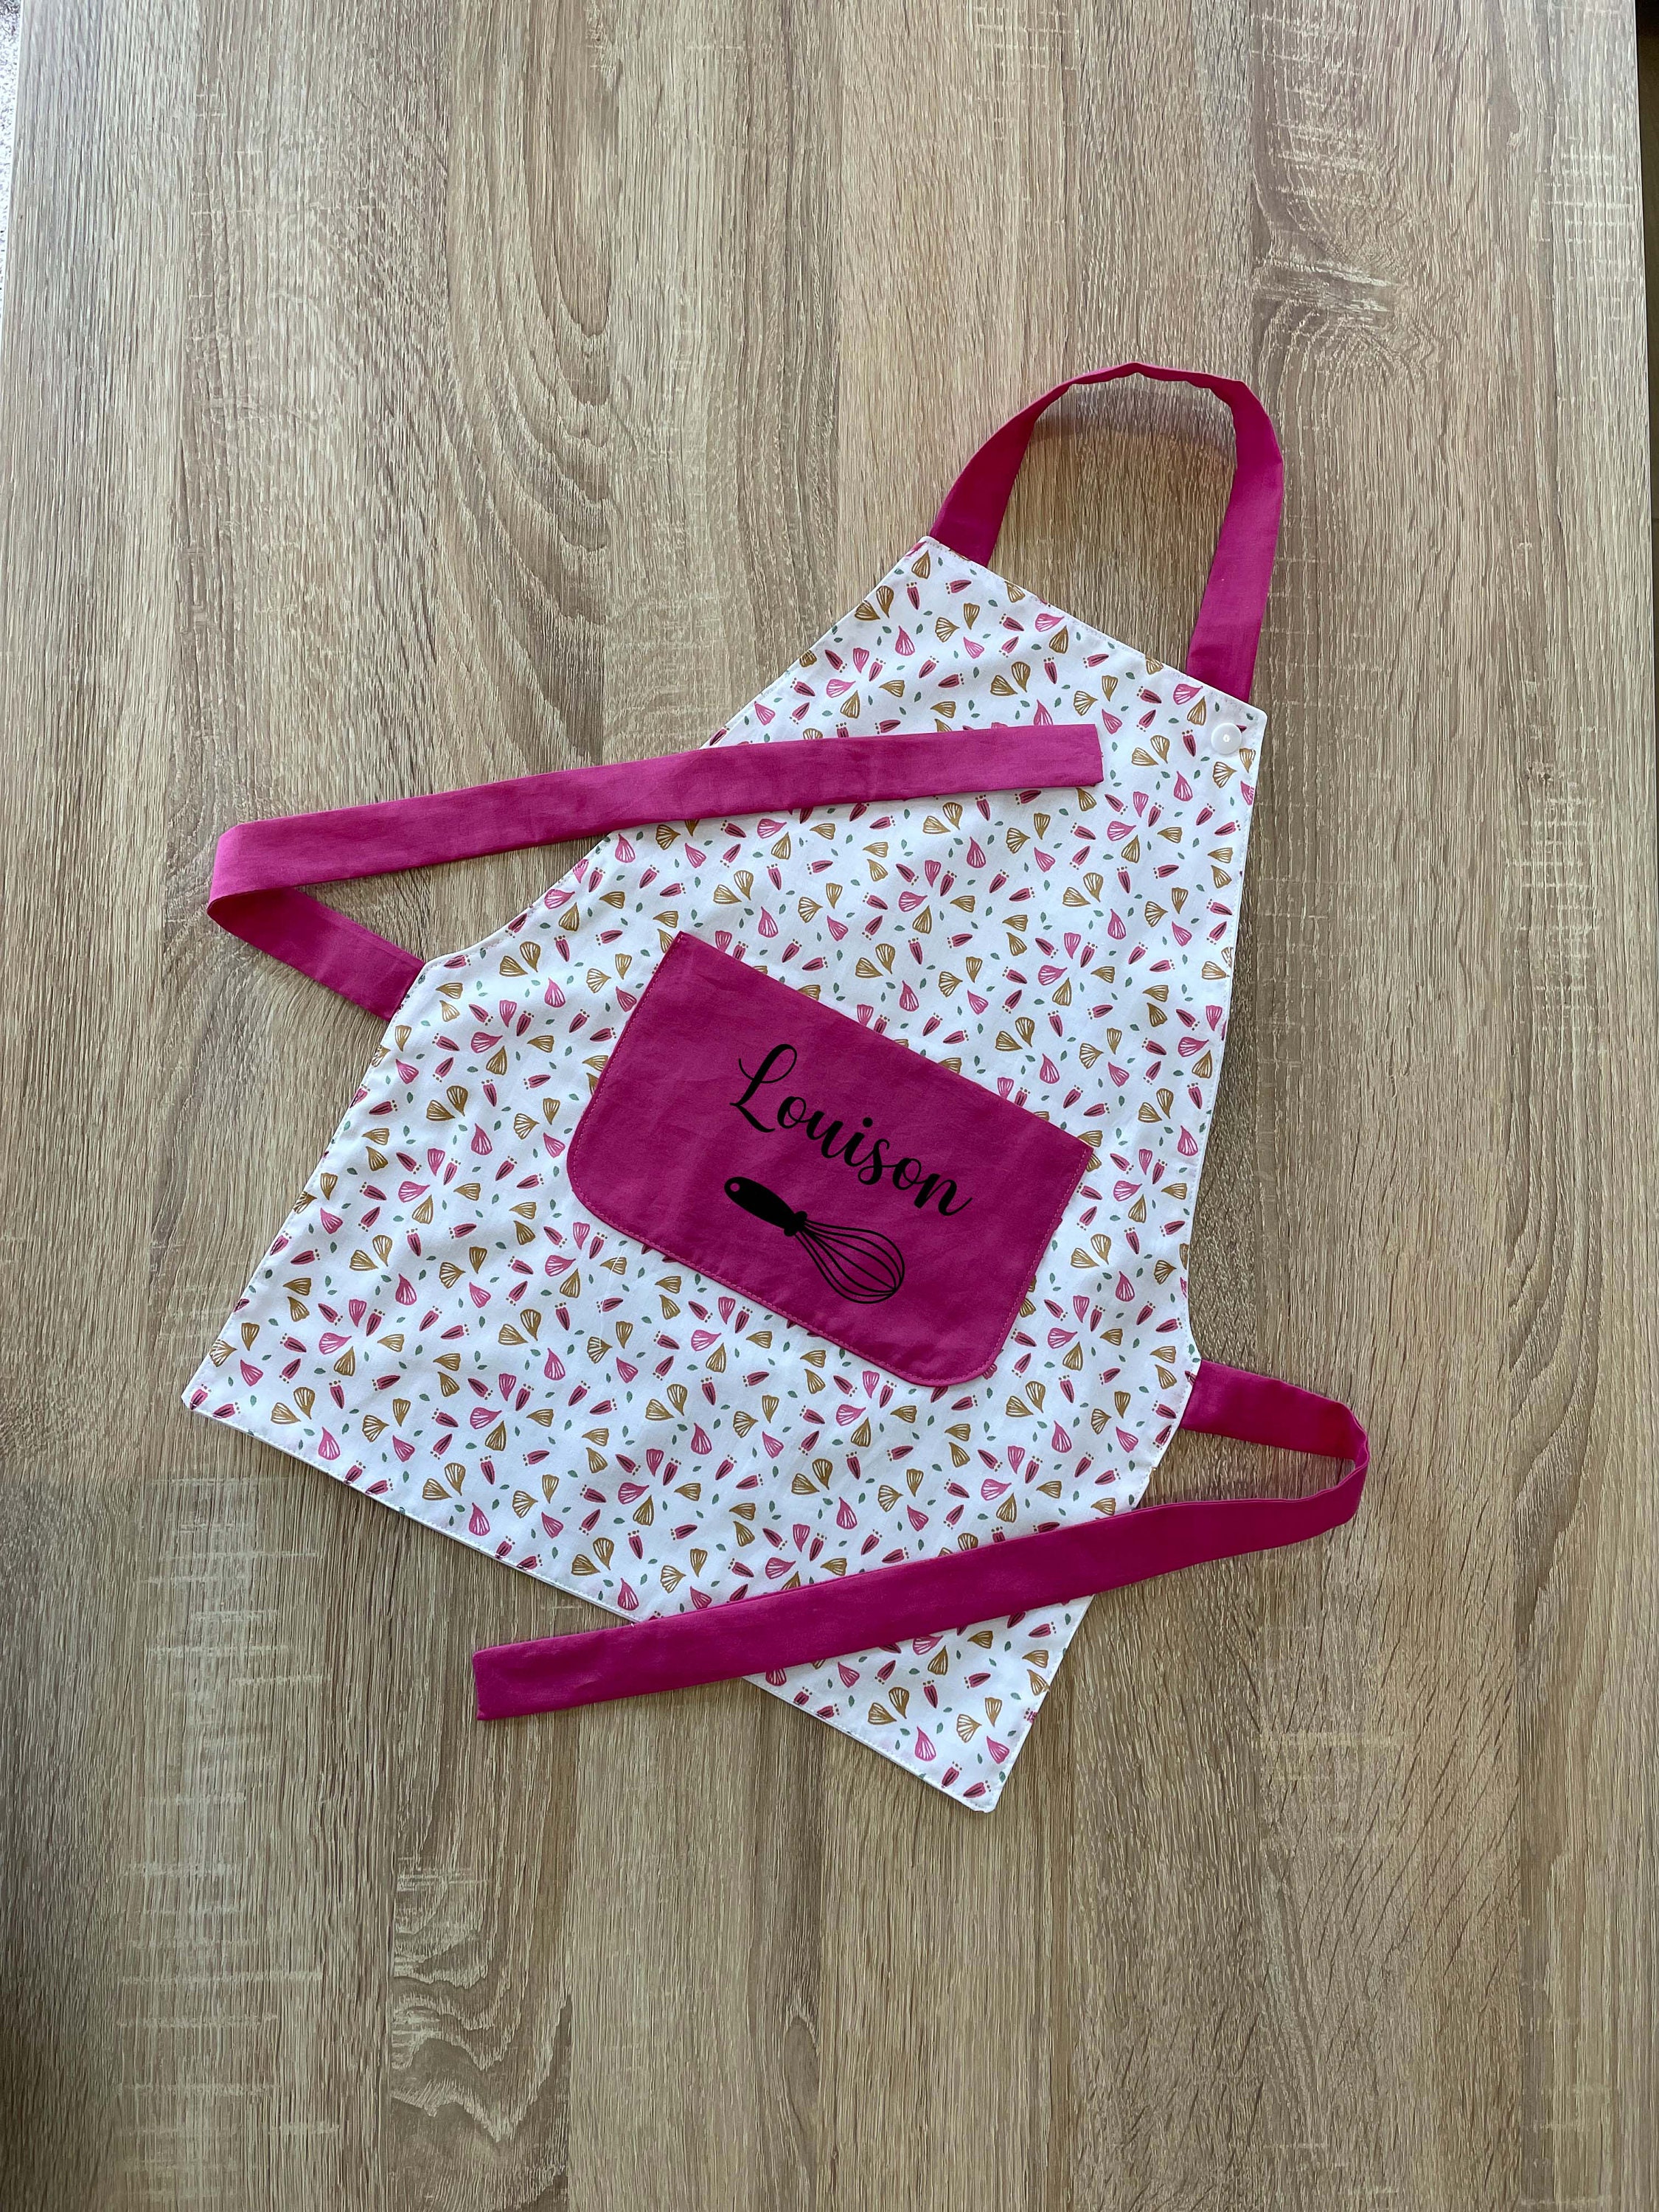 Personalized Children's Kitchen Apron With First Name 